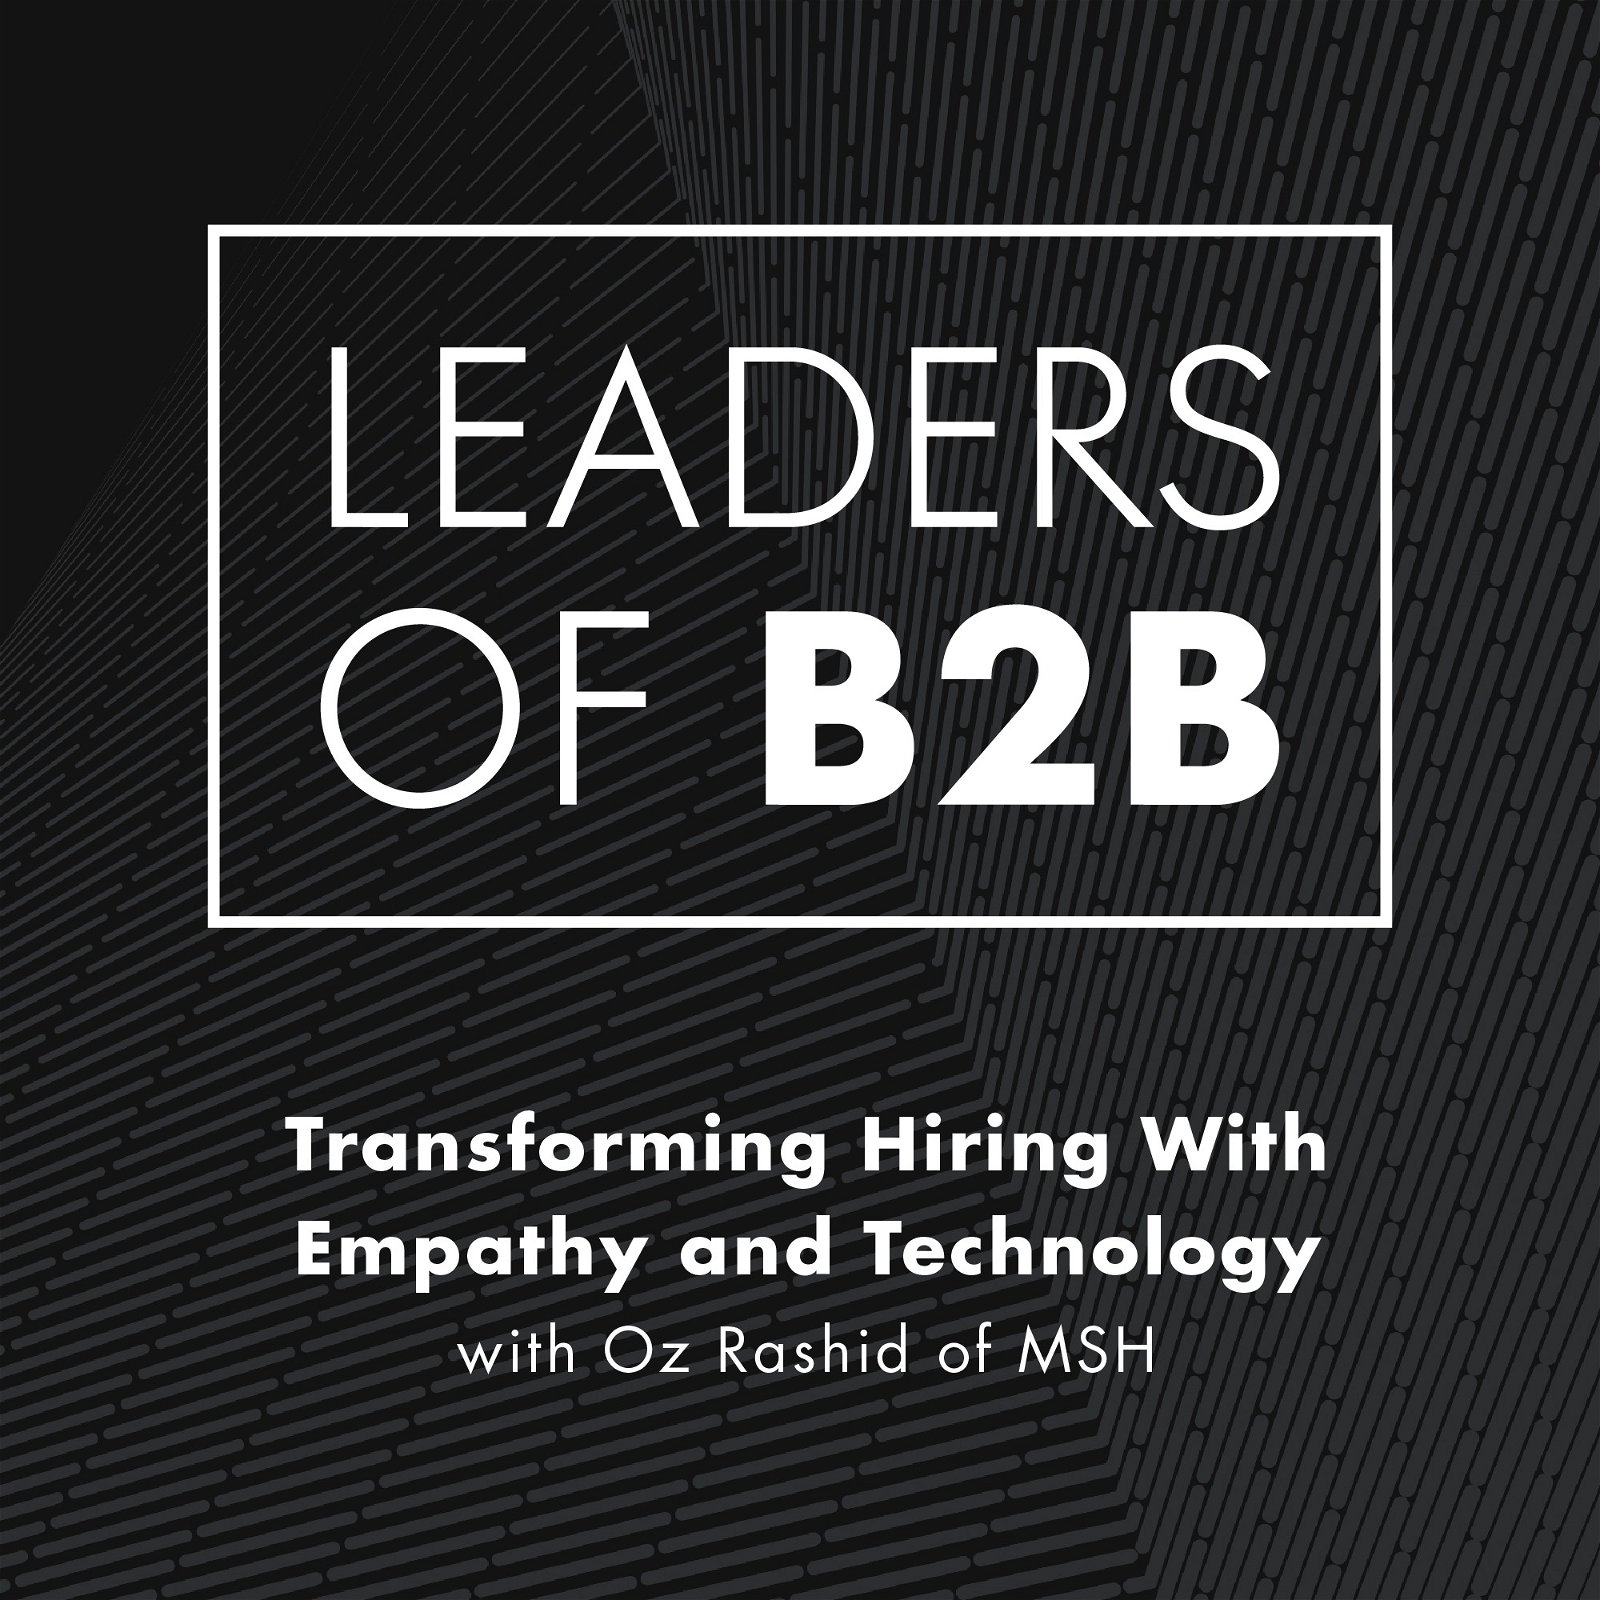 Transforming Hiring With Empathy and Technology with Oz Rashid of MSH